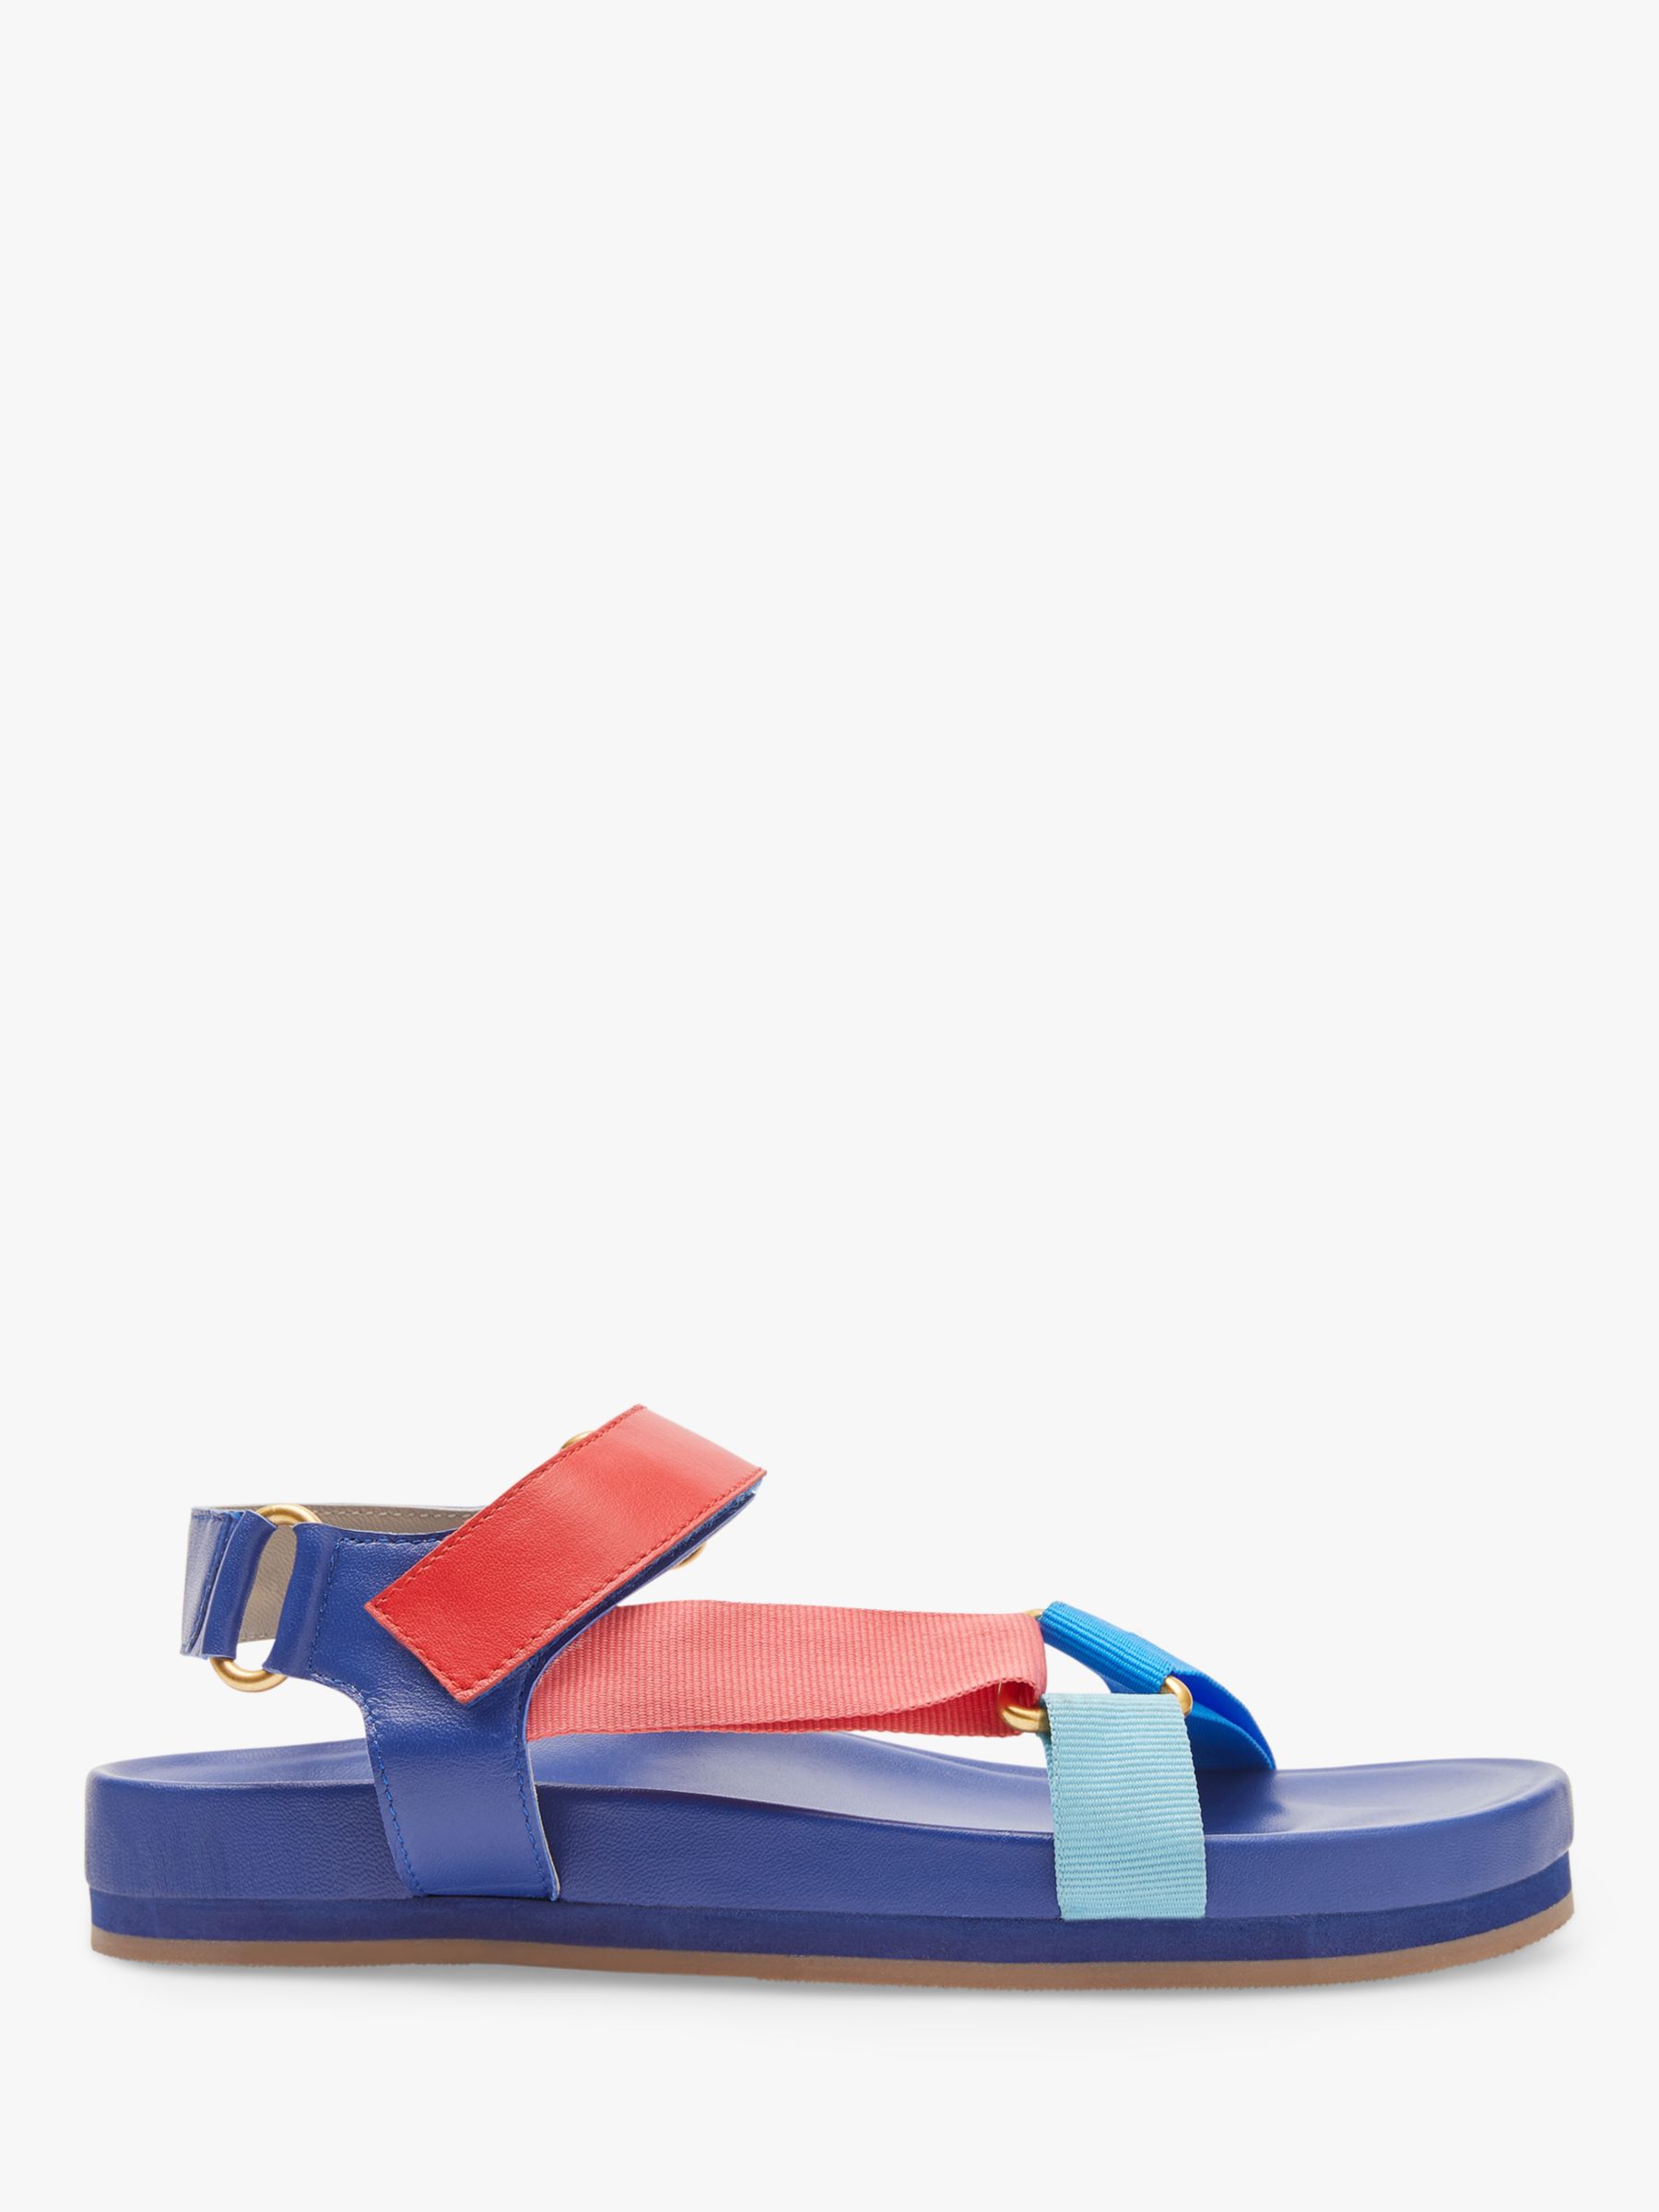 Boden Colourblock Footbed Sandals, Navy at John Lewis & Partners